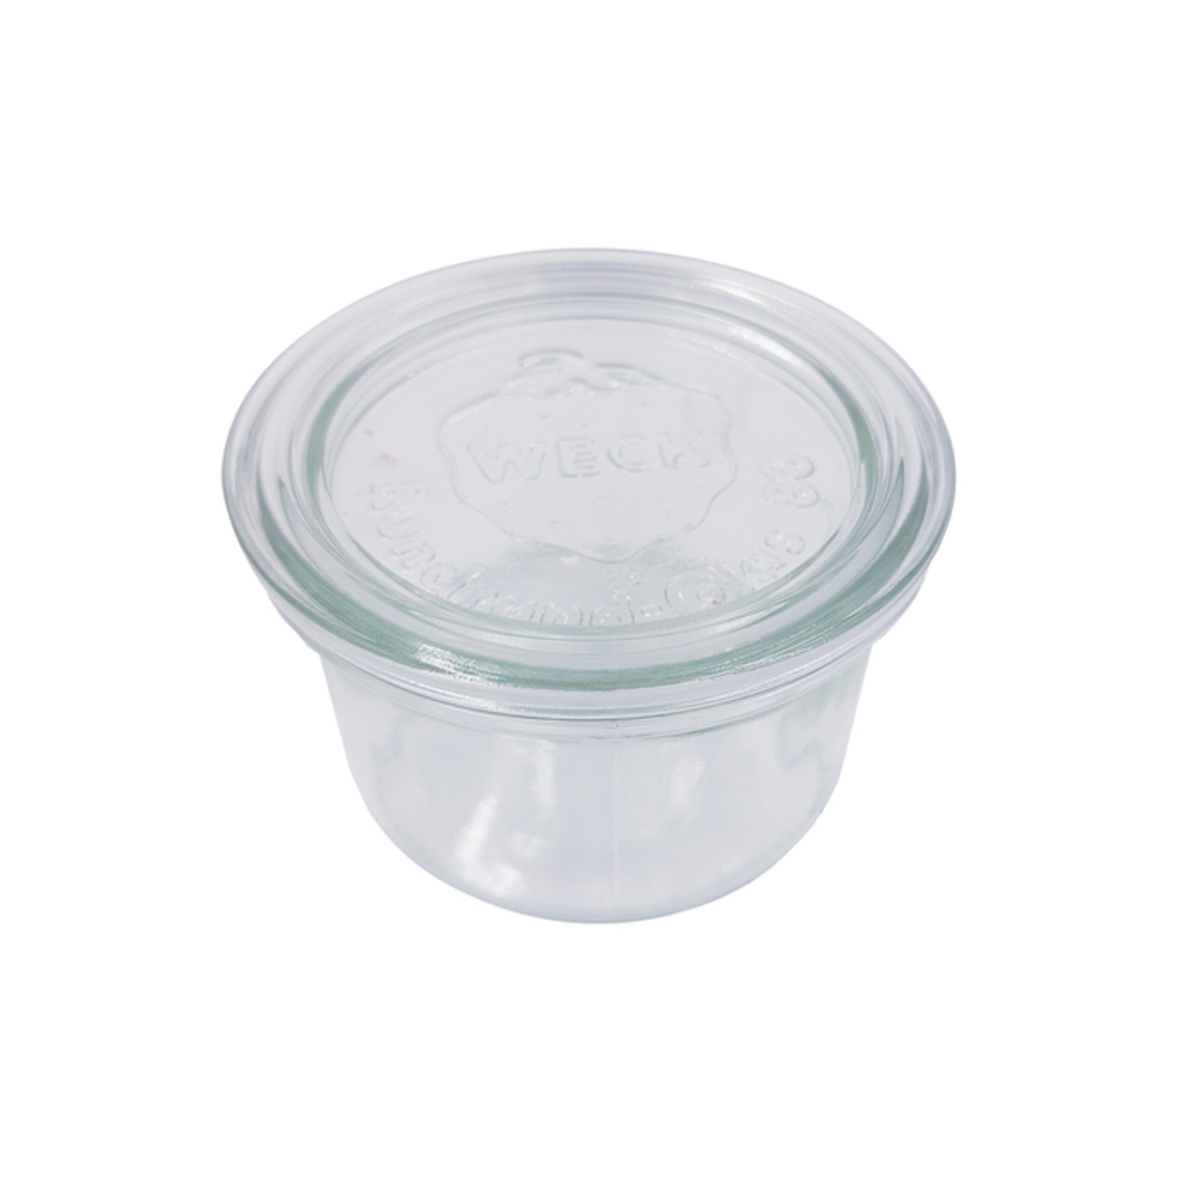 Picture of Packnwood 294WEK751 3.14 Dia. x 2.36 in. 6.7 oz Bokocook Reusable Weck Jars with Glass Lid Mold - 12 Piece